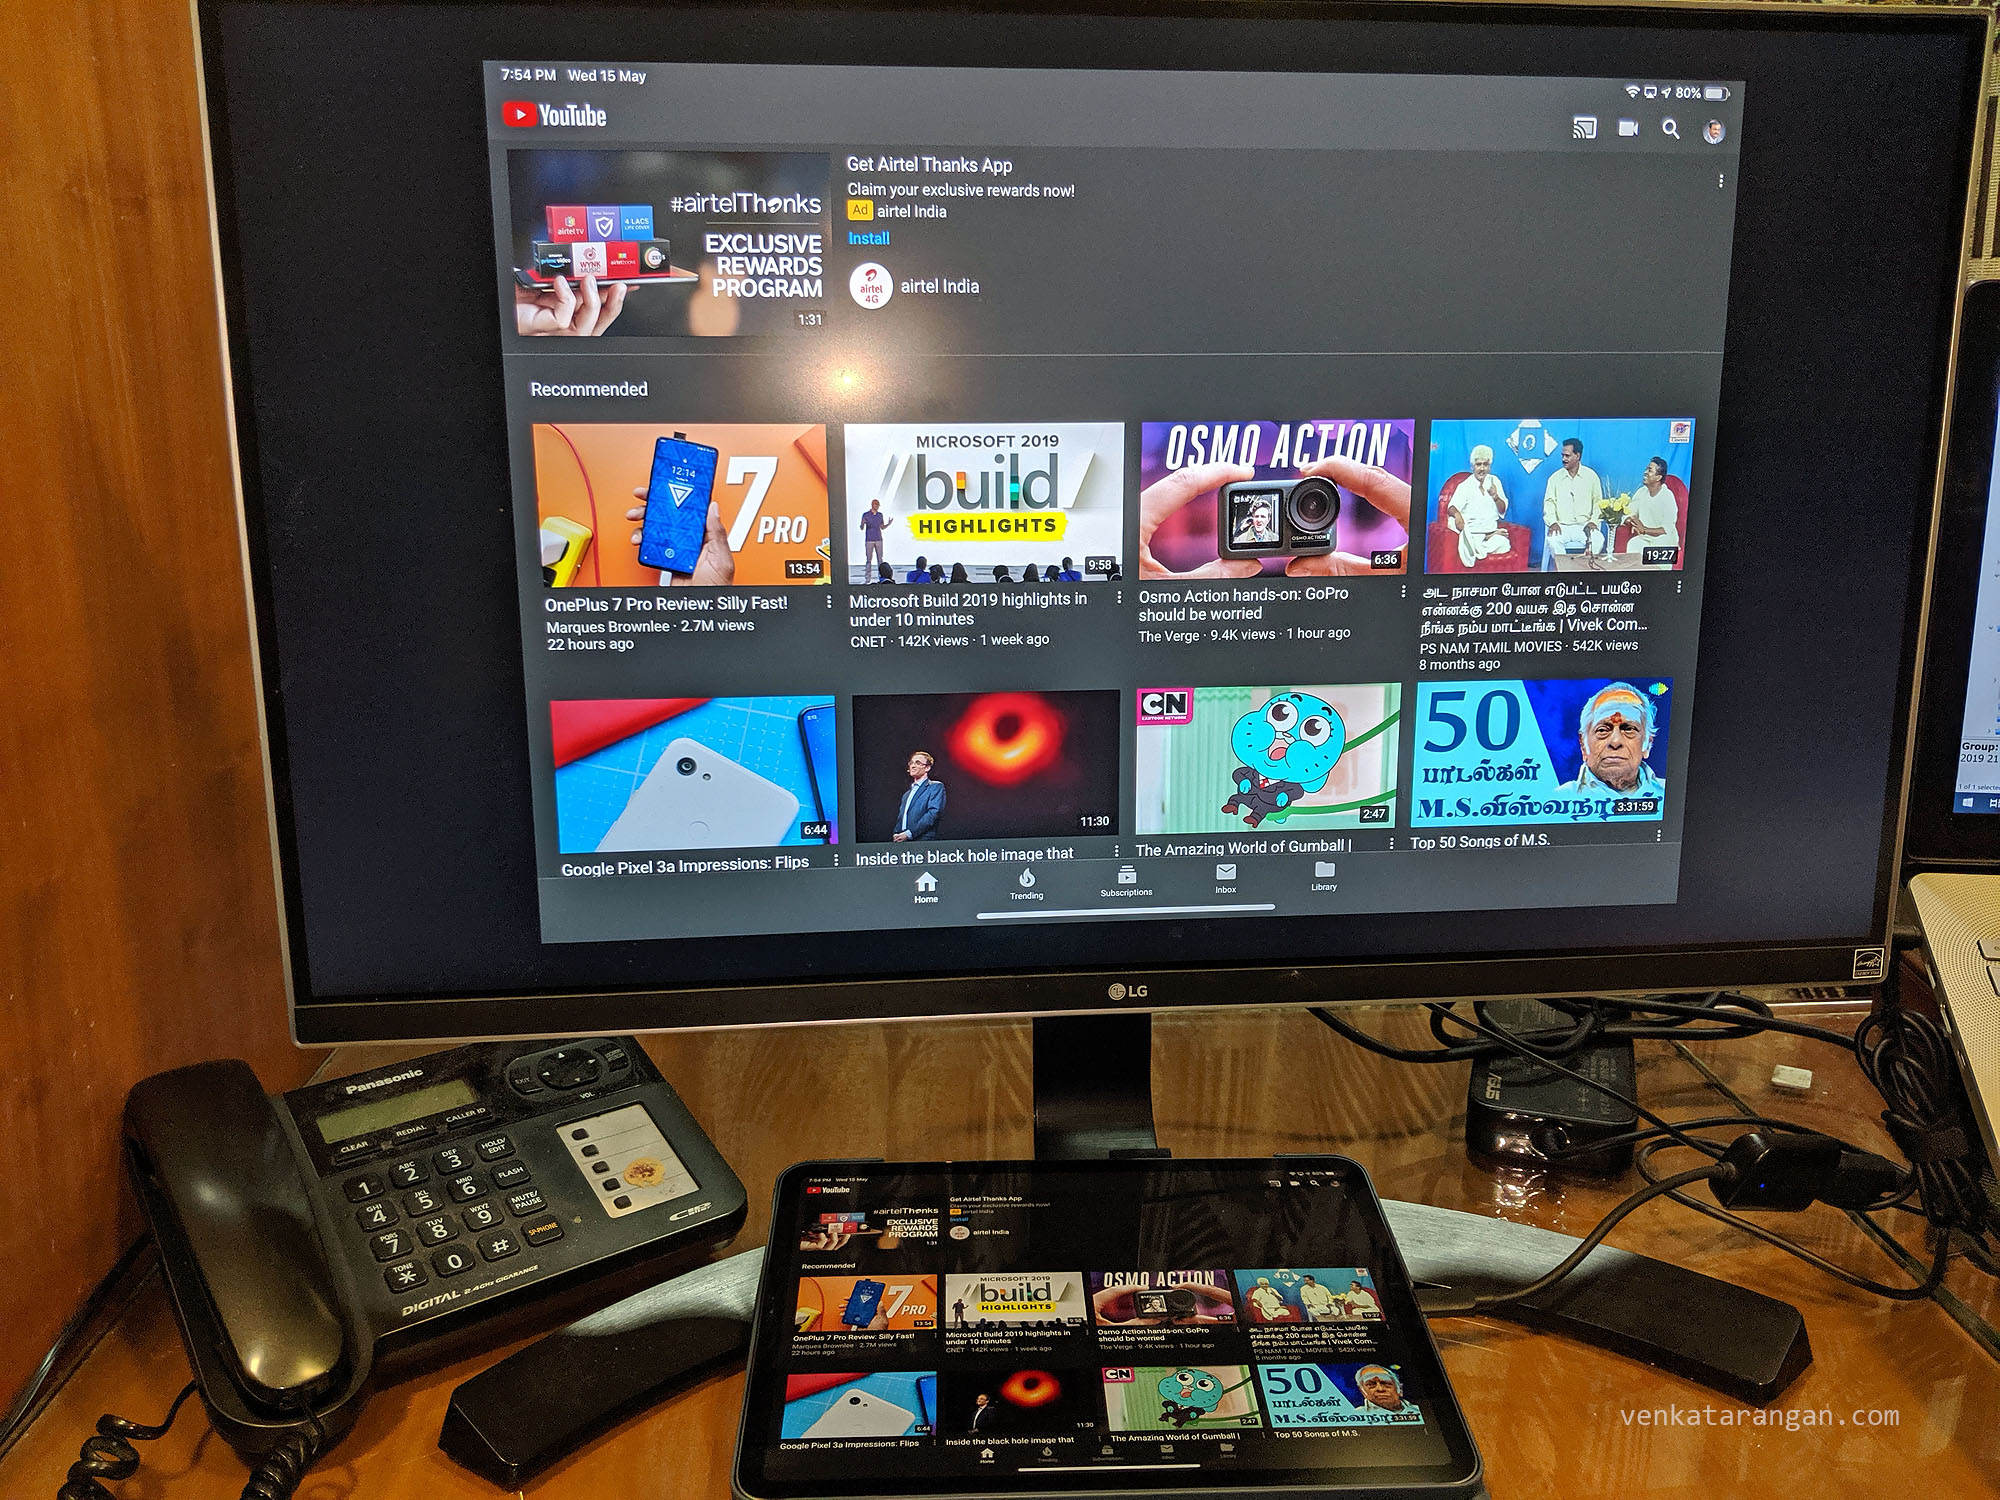 iPad Pro (2018) 11 inch connected to an external monitor (27 inch) using USB-C